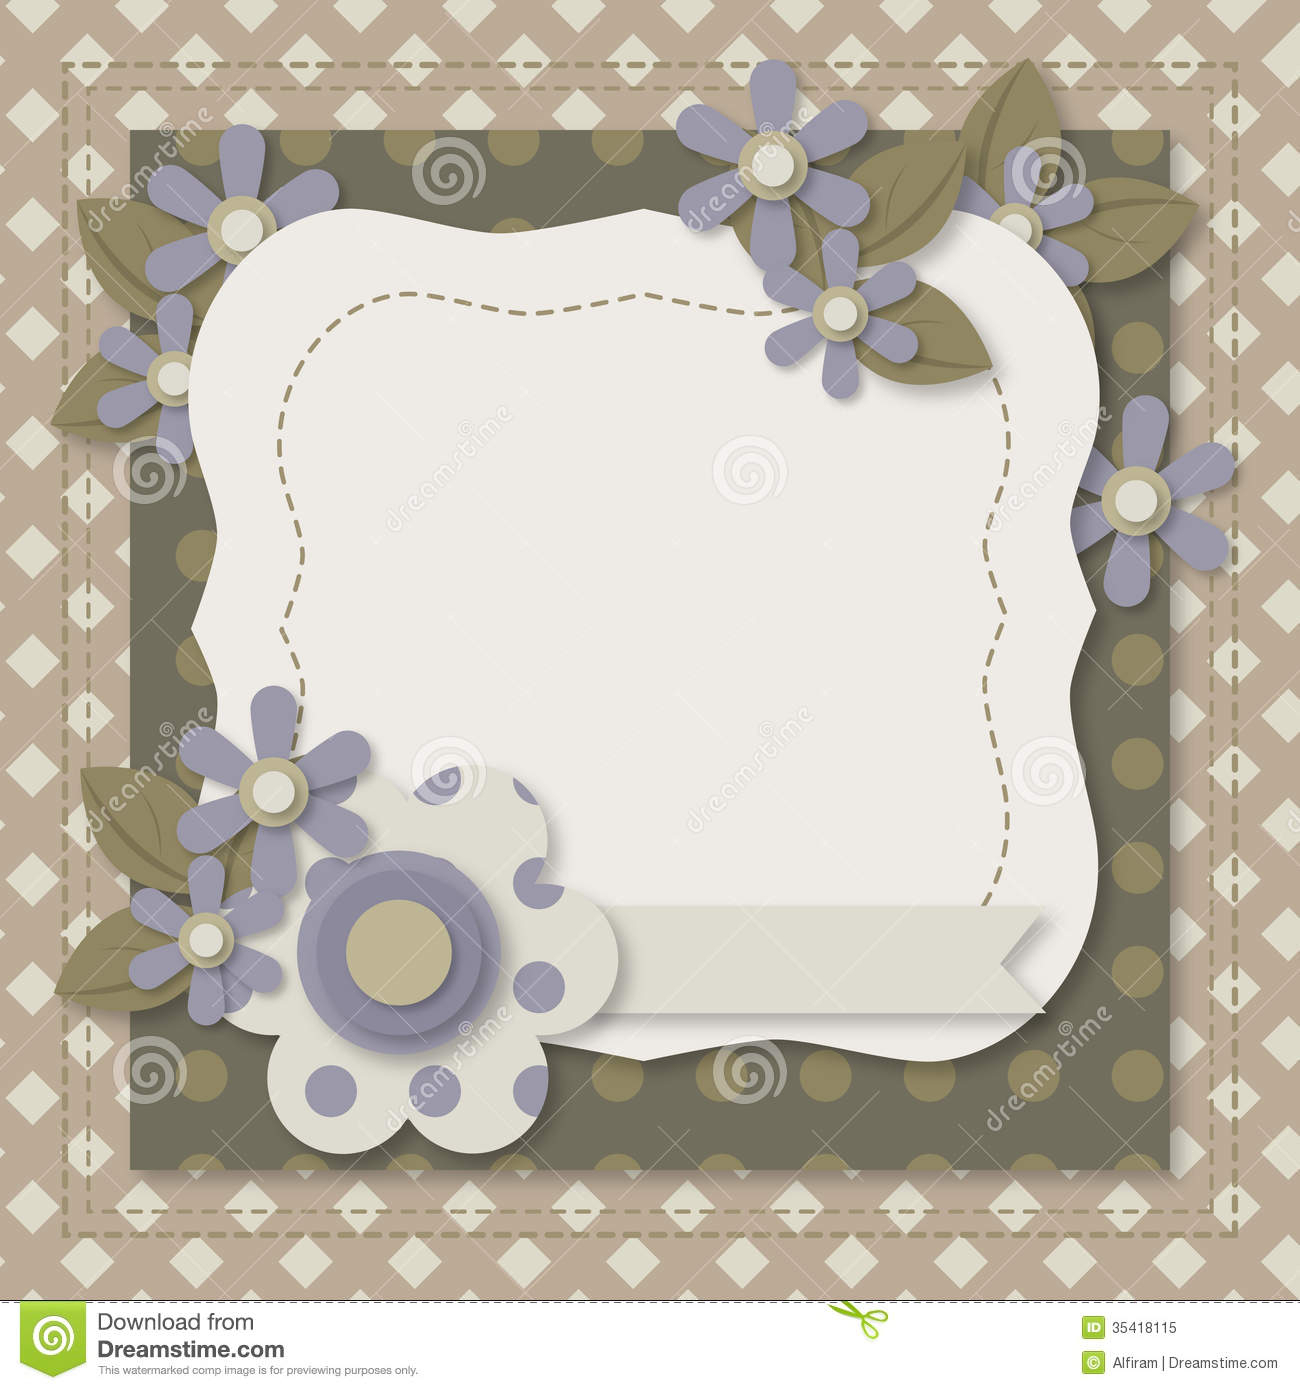 Template Of Greeting Card Or Album Page Stock Vector Throughout Greeting Card Layout Templates